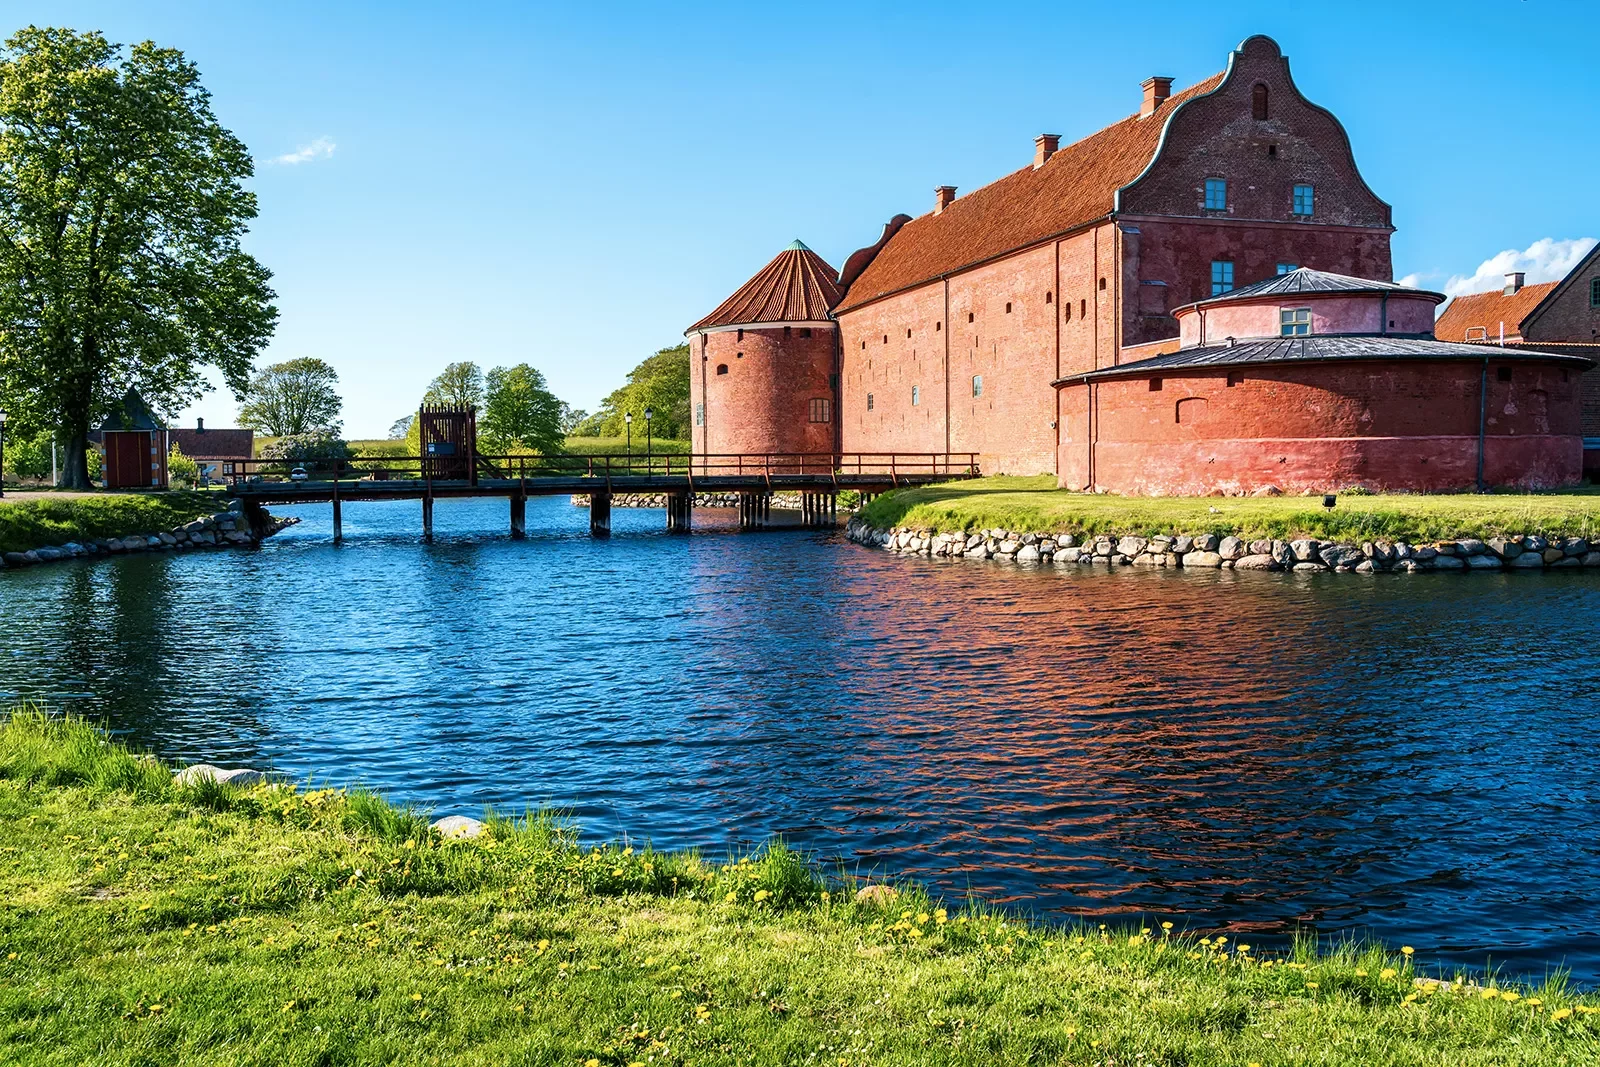 Red brick building with a bridge surrounded by water